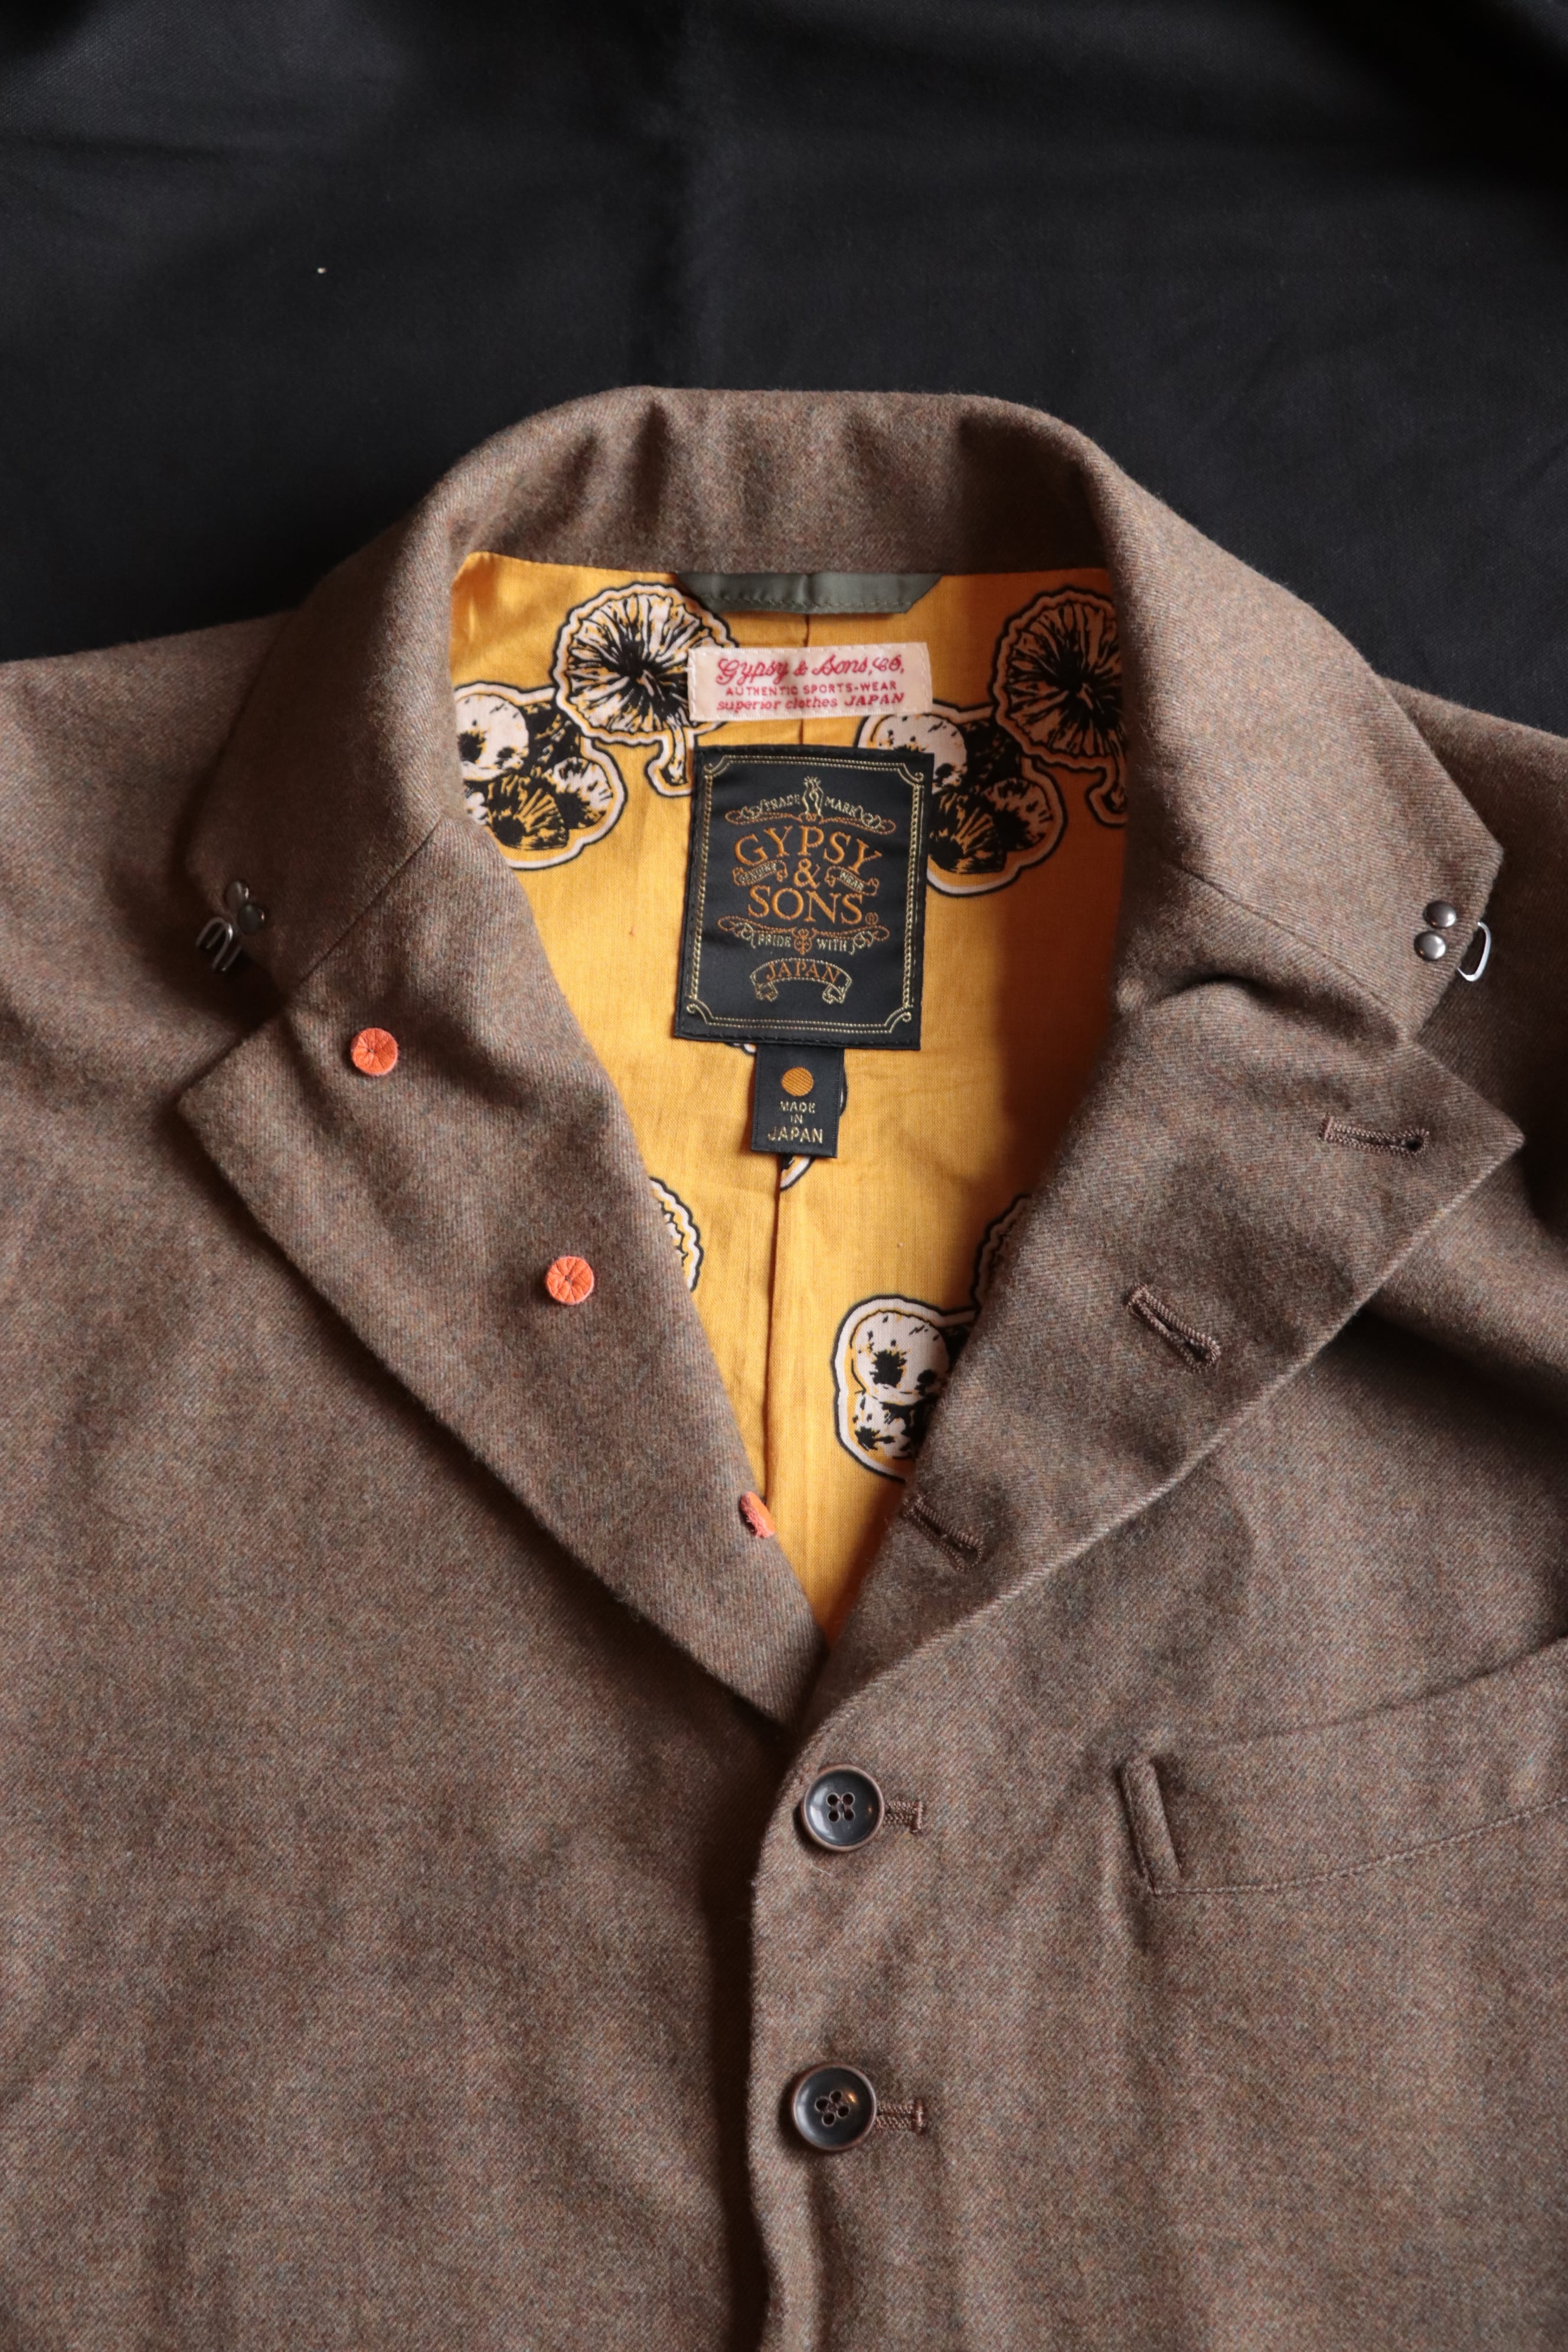 GYPSY & SONS/ジプシーアンドサンズ　T/COTTON NOMAD JACKET　GS2129901 | MAMBO powered by  BASE